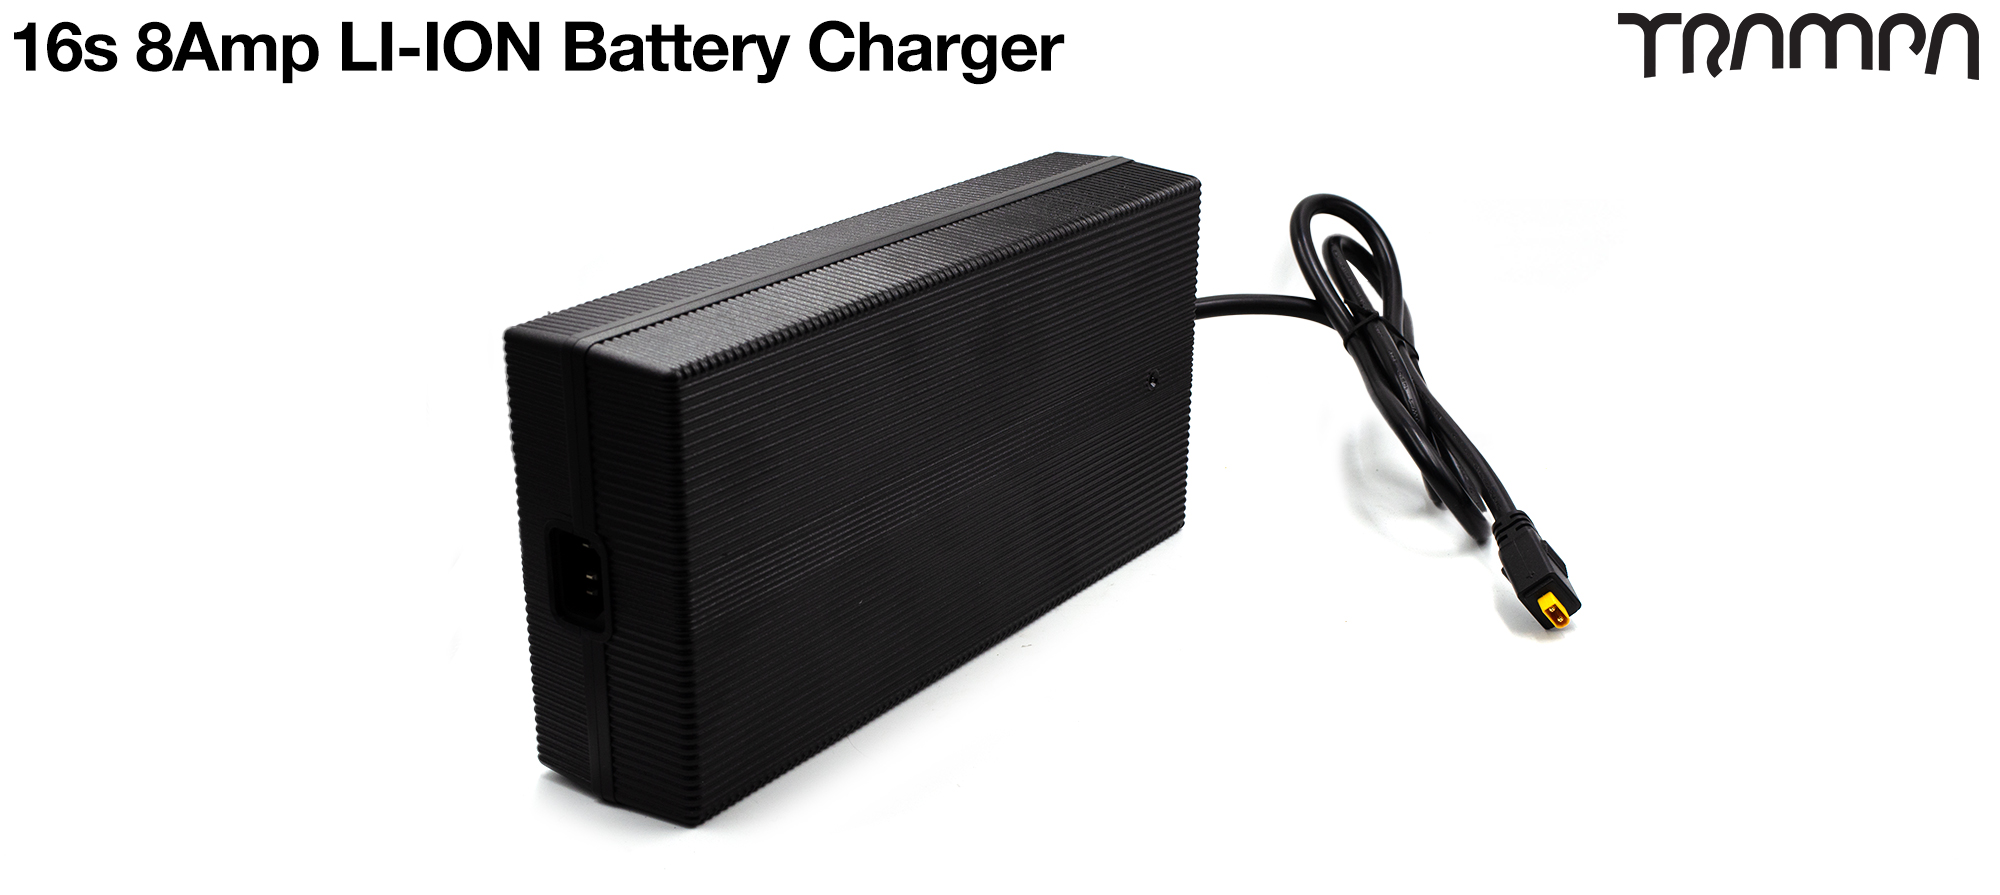 Supply a 16s 8Amp Charger (+£160)